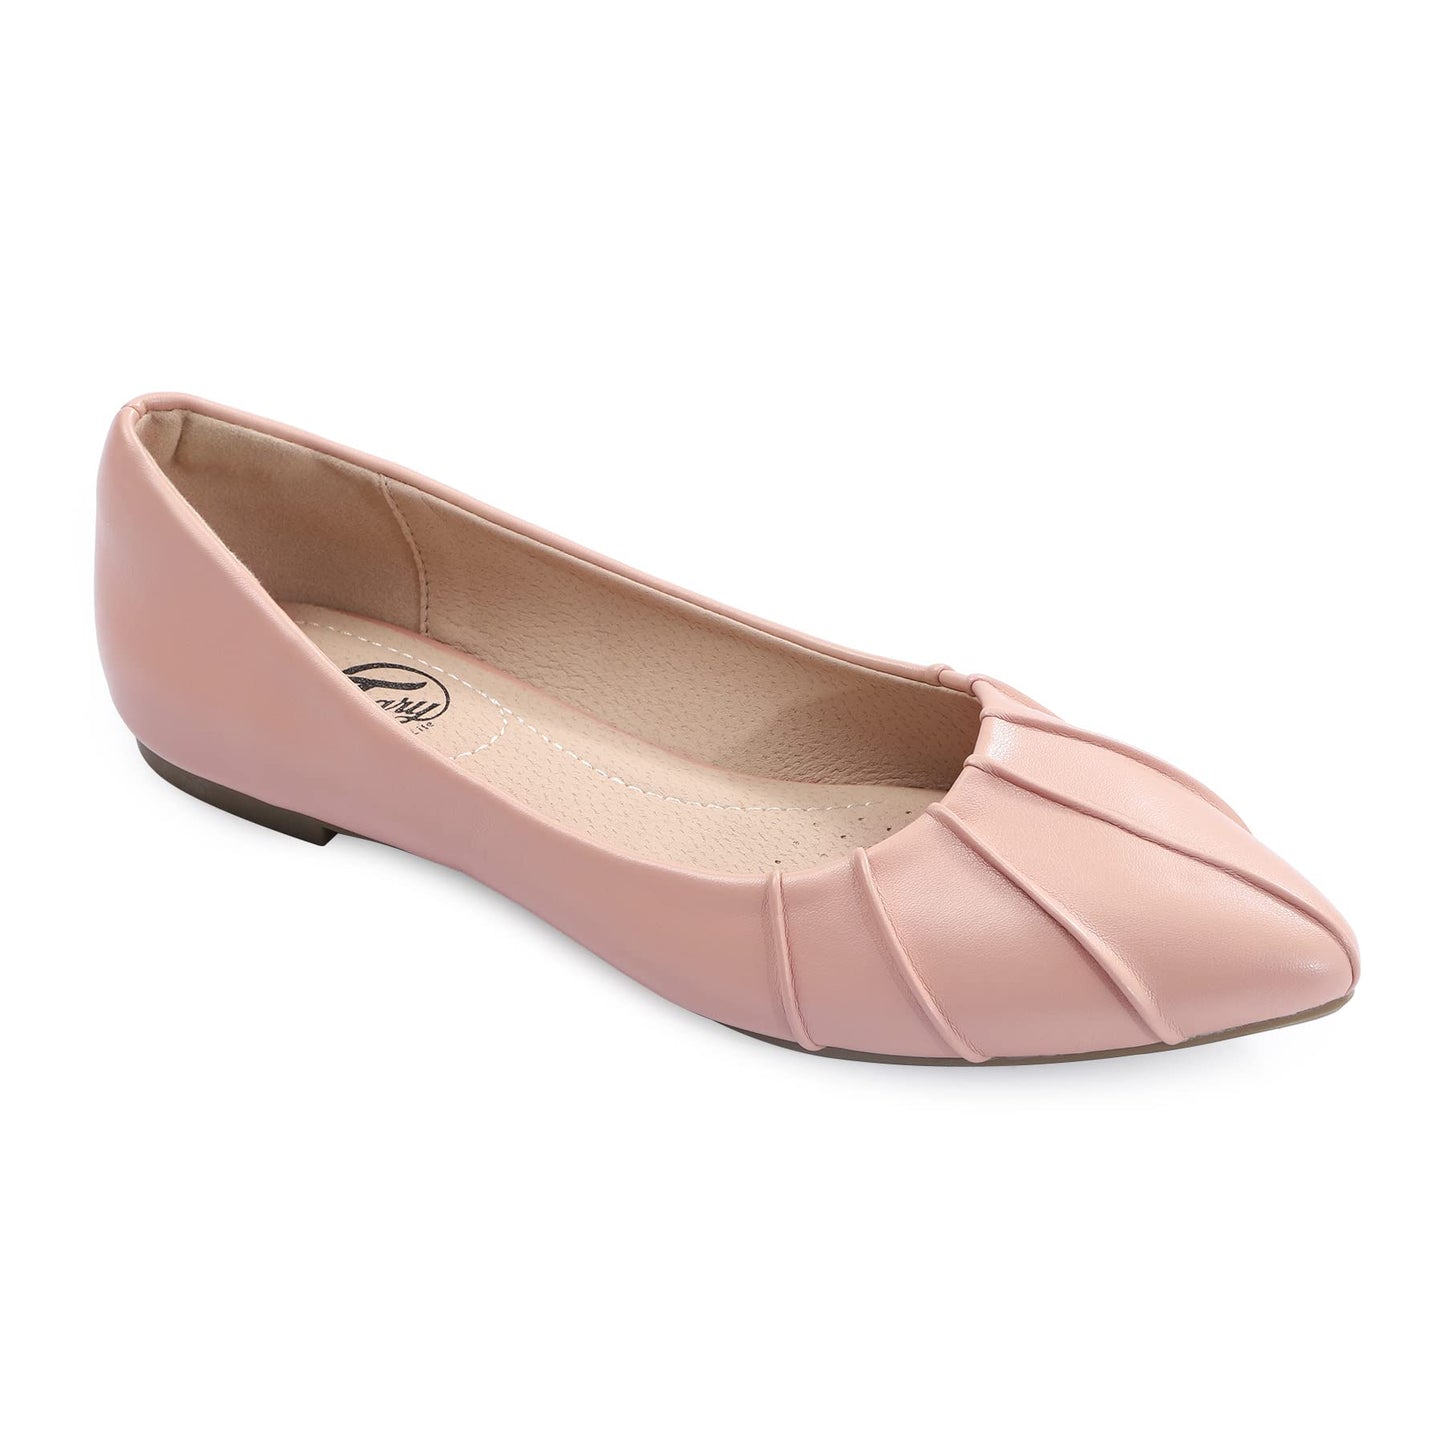 Pleated Pointed Toe Ballet Flat